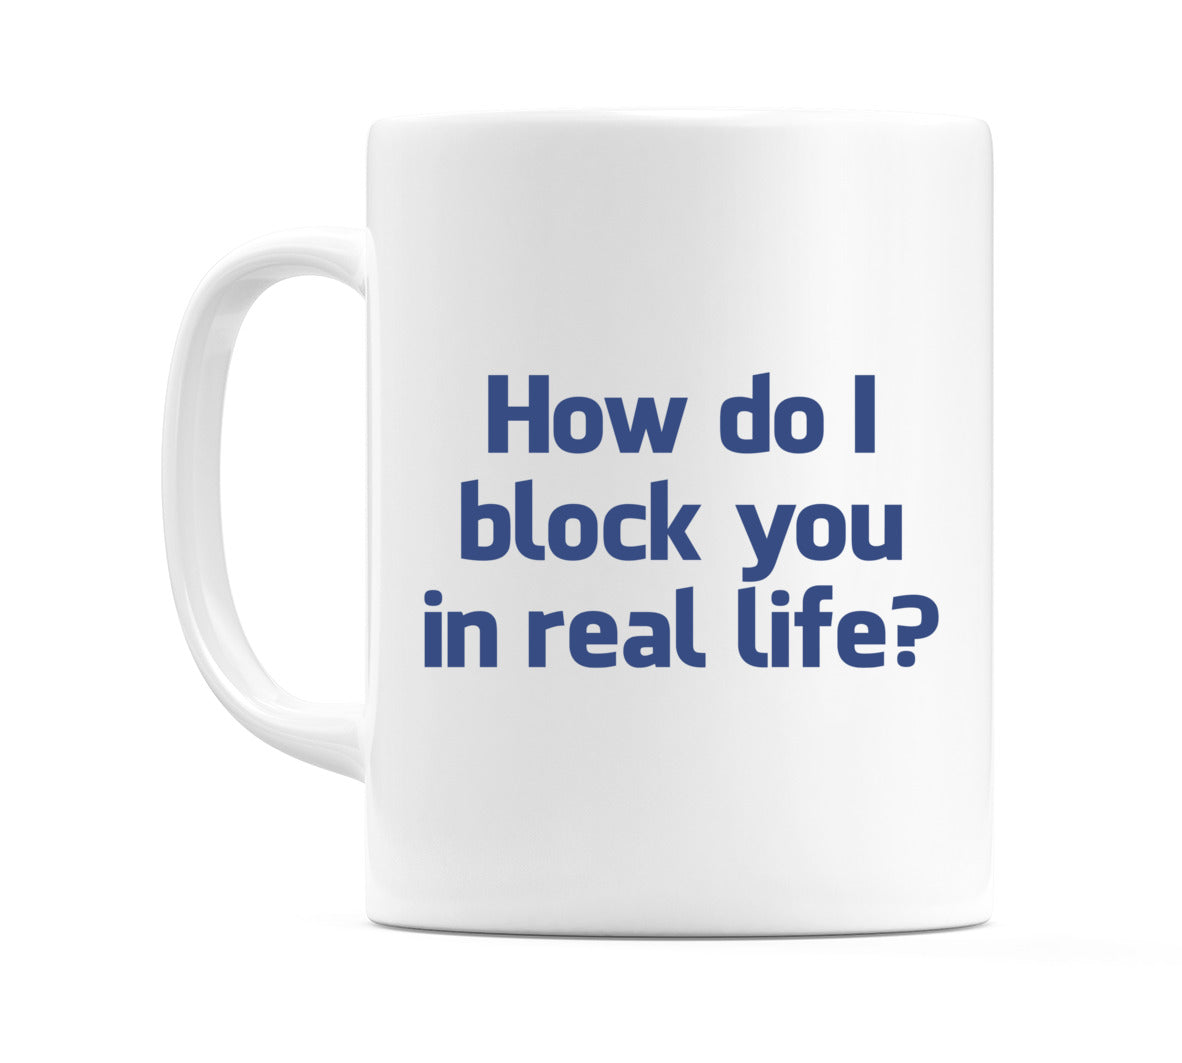 How do I block you in real life? Mug